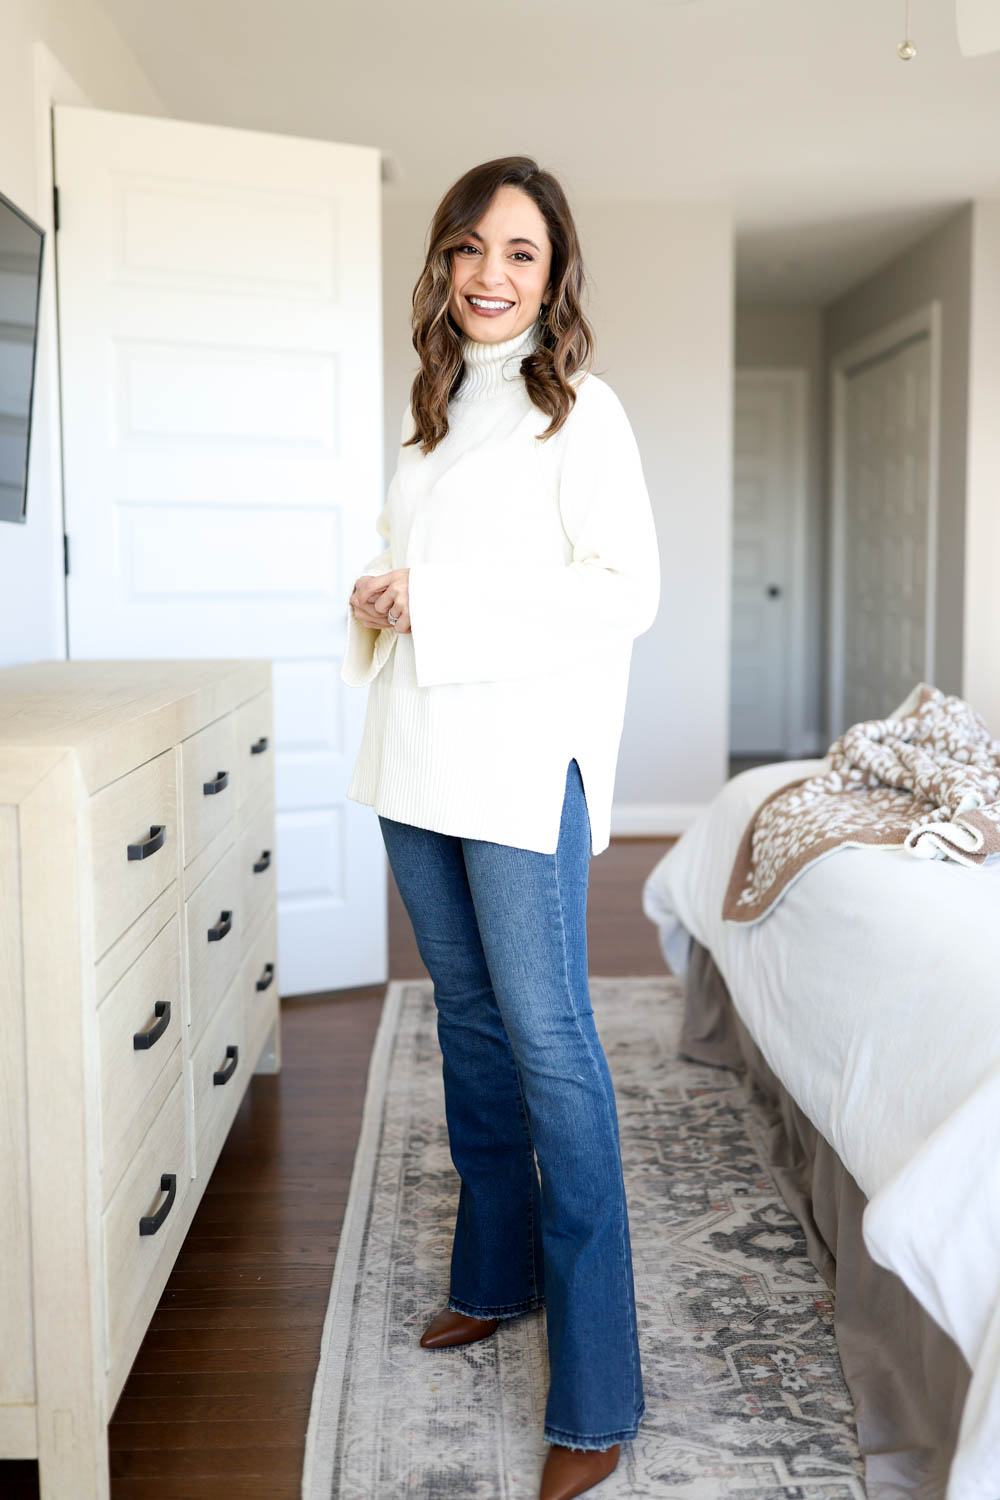 Sofia Vergara Wears 7 For All Mankind Ankle Skinny Jeans - THE JEANS BLOG